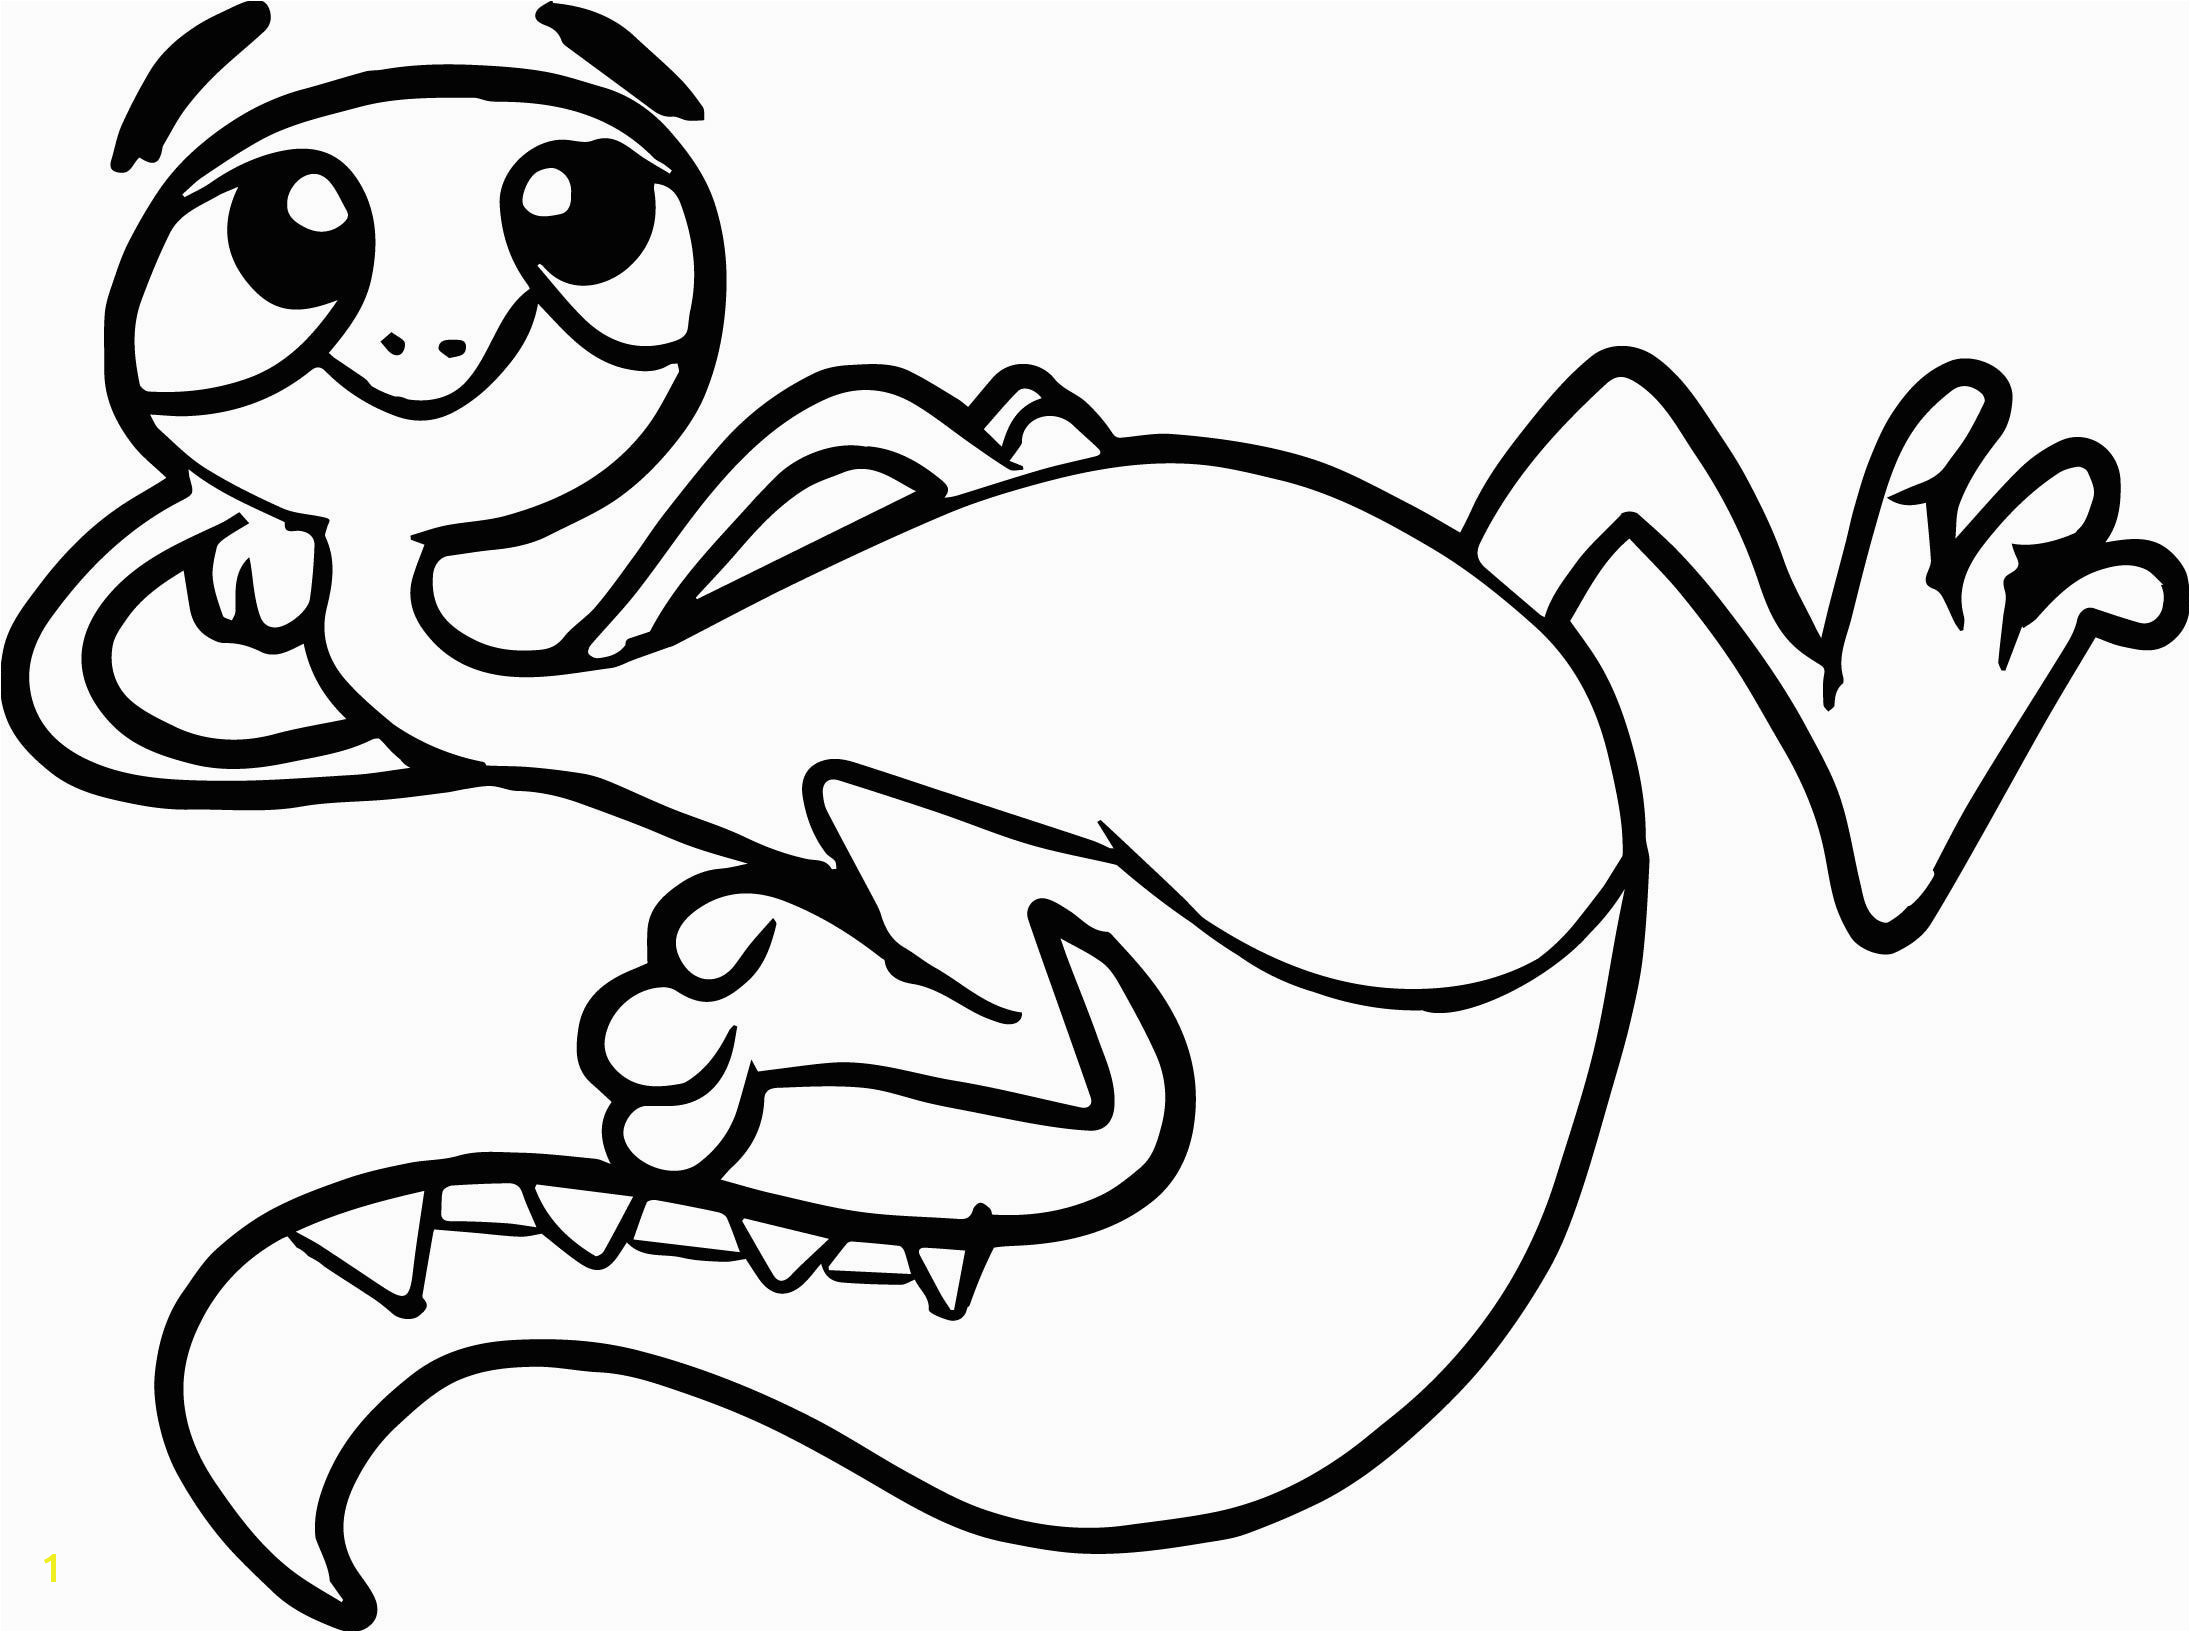 cool Relax Lizard Coloring Page